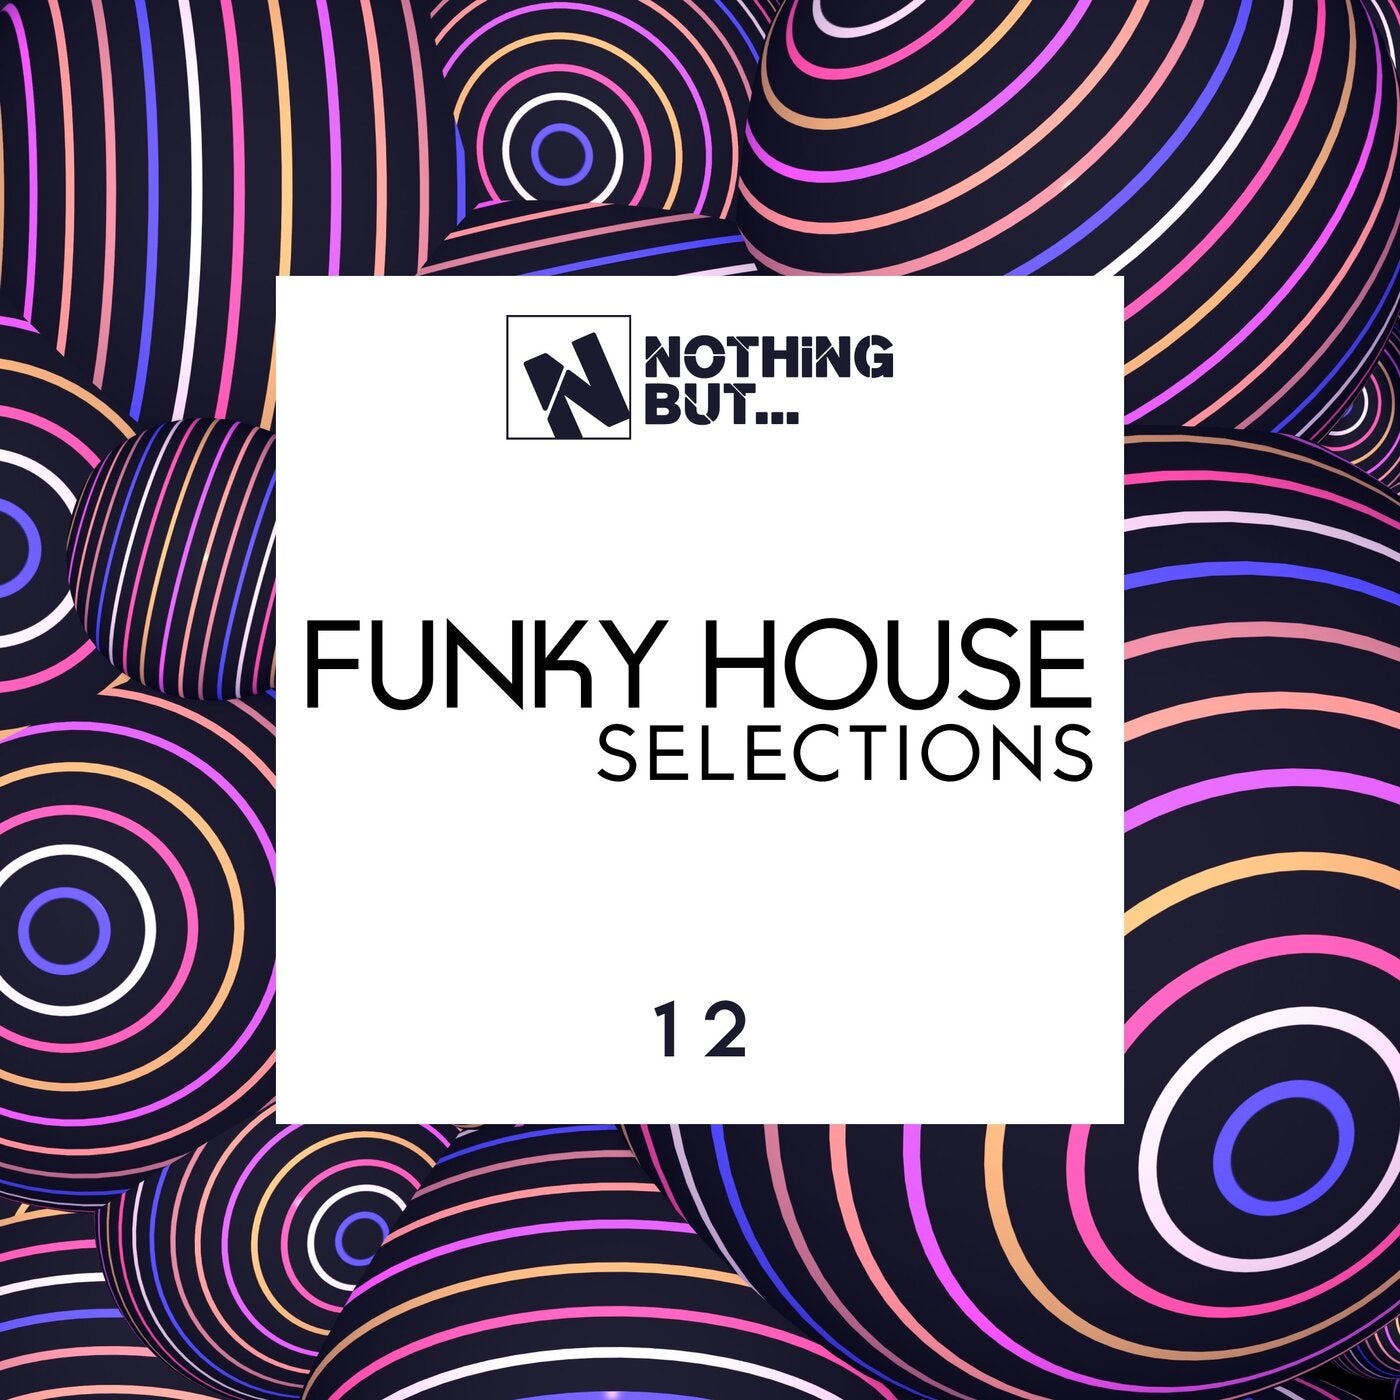 Nothing But... Funky House Selections, Vol. 12